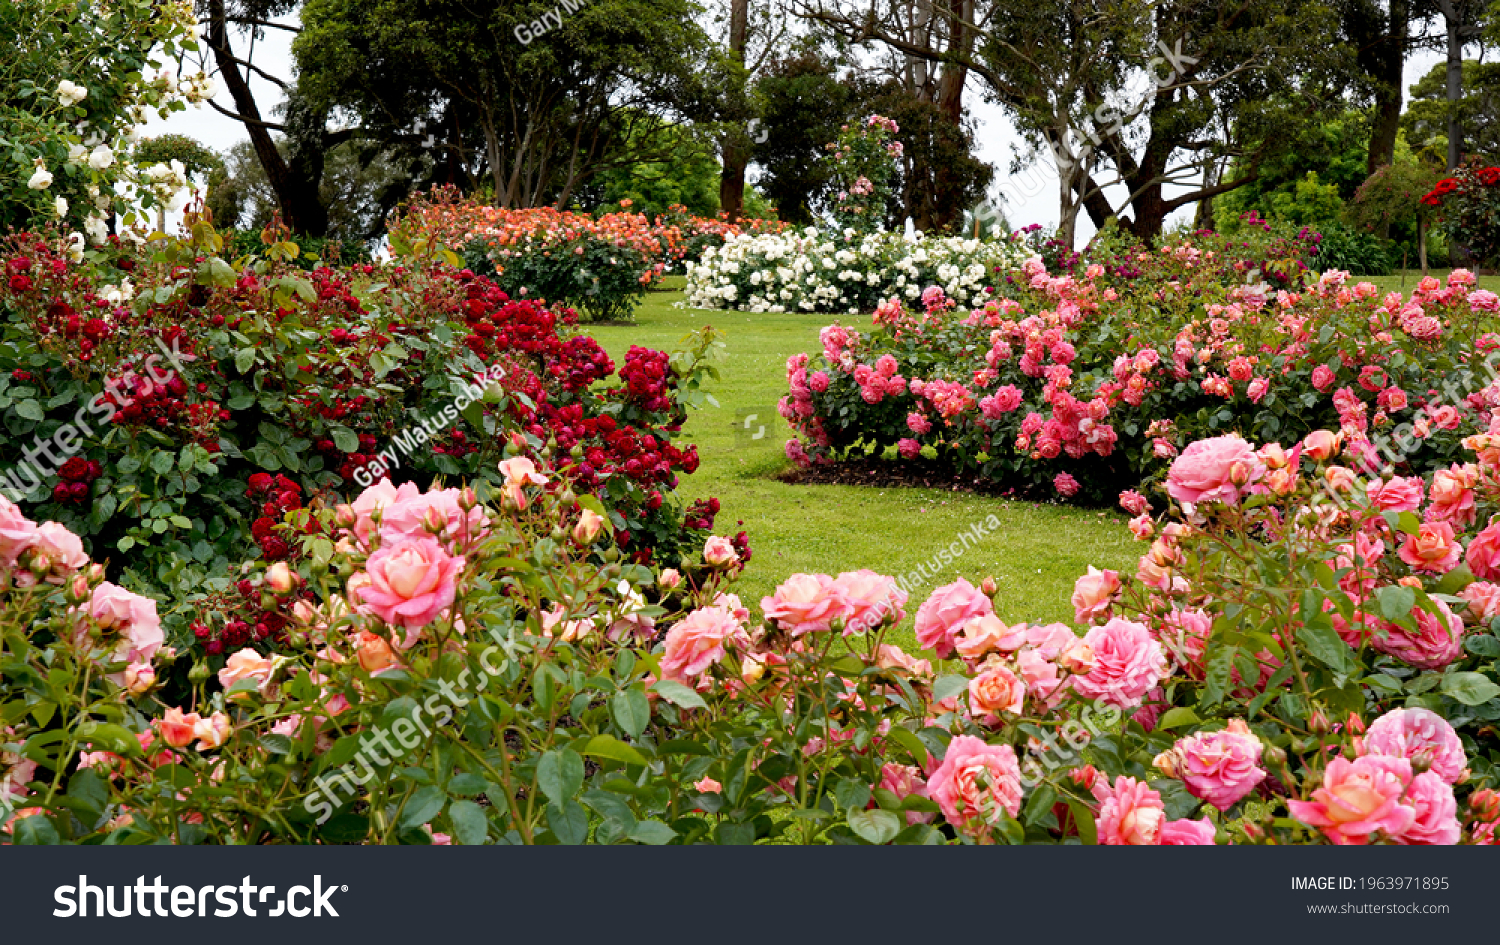 Rose garden.  Beautiful display of roses in a large garden setting. #1963971895